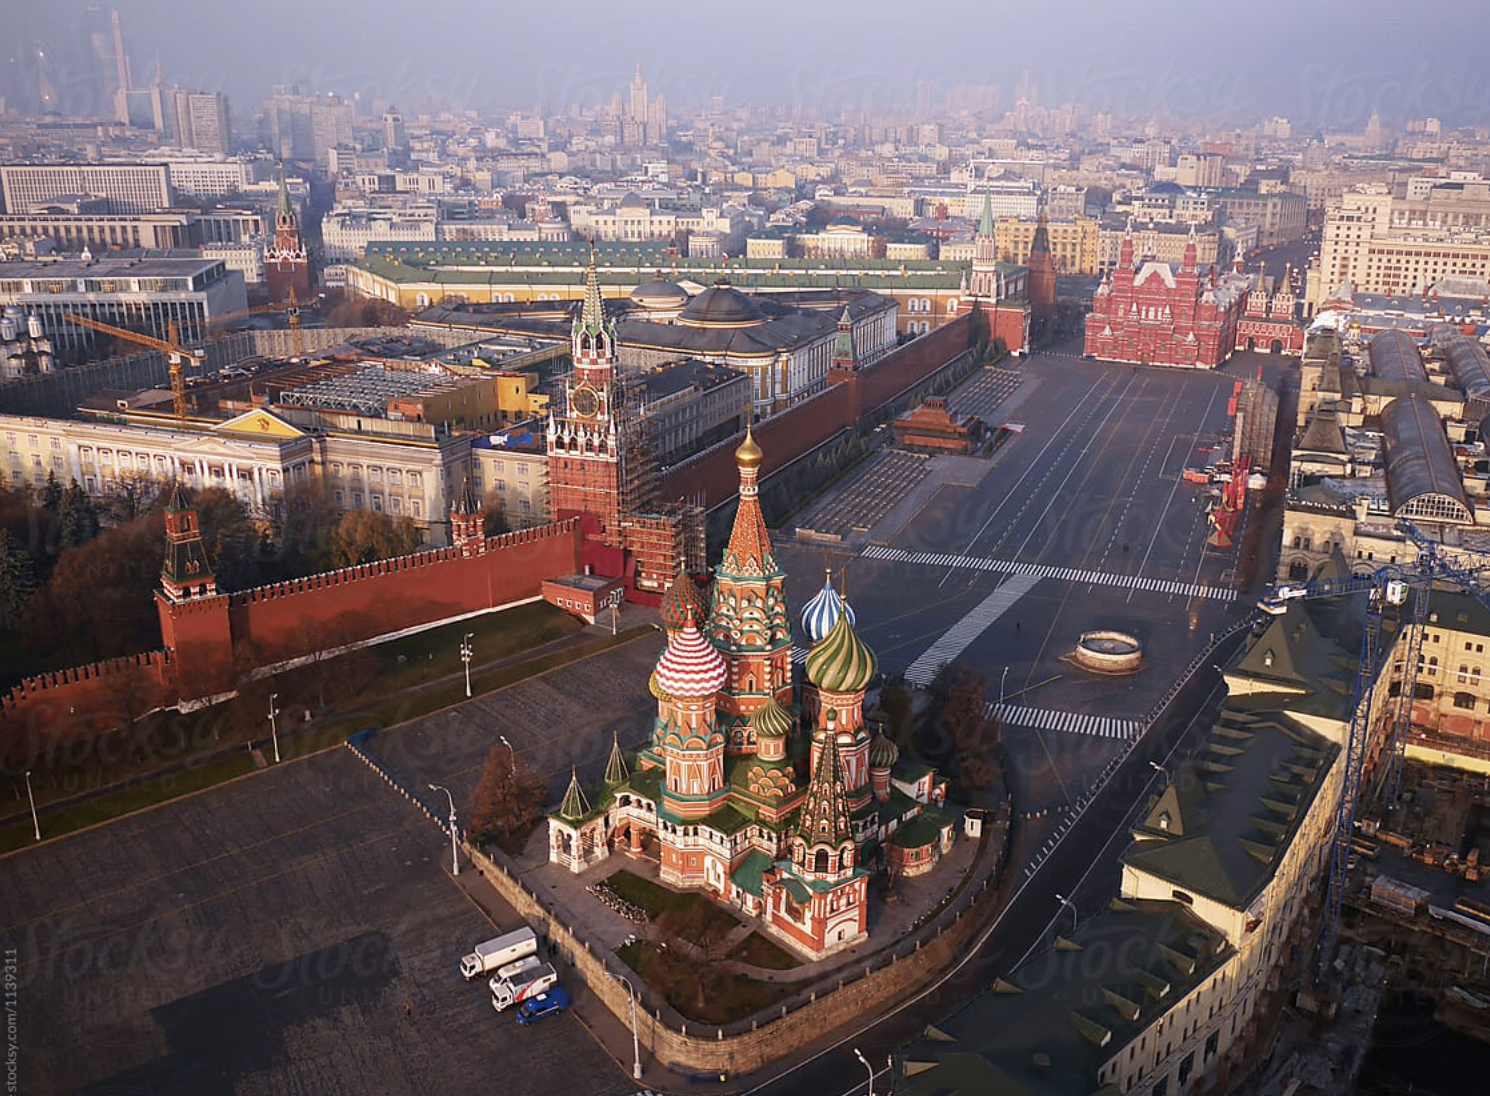  Red Square, Russia, once ground zero, where Darrel and his mates aboard submarines had missiles pointed during the Cold War. “Ironically”, 30 years later, Darrel would stand in Red Square, and become friends with many Russians. Visit minute 1:30:00 